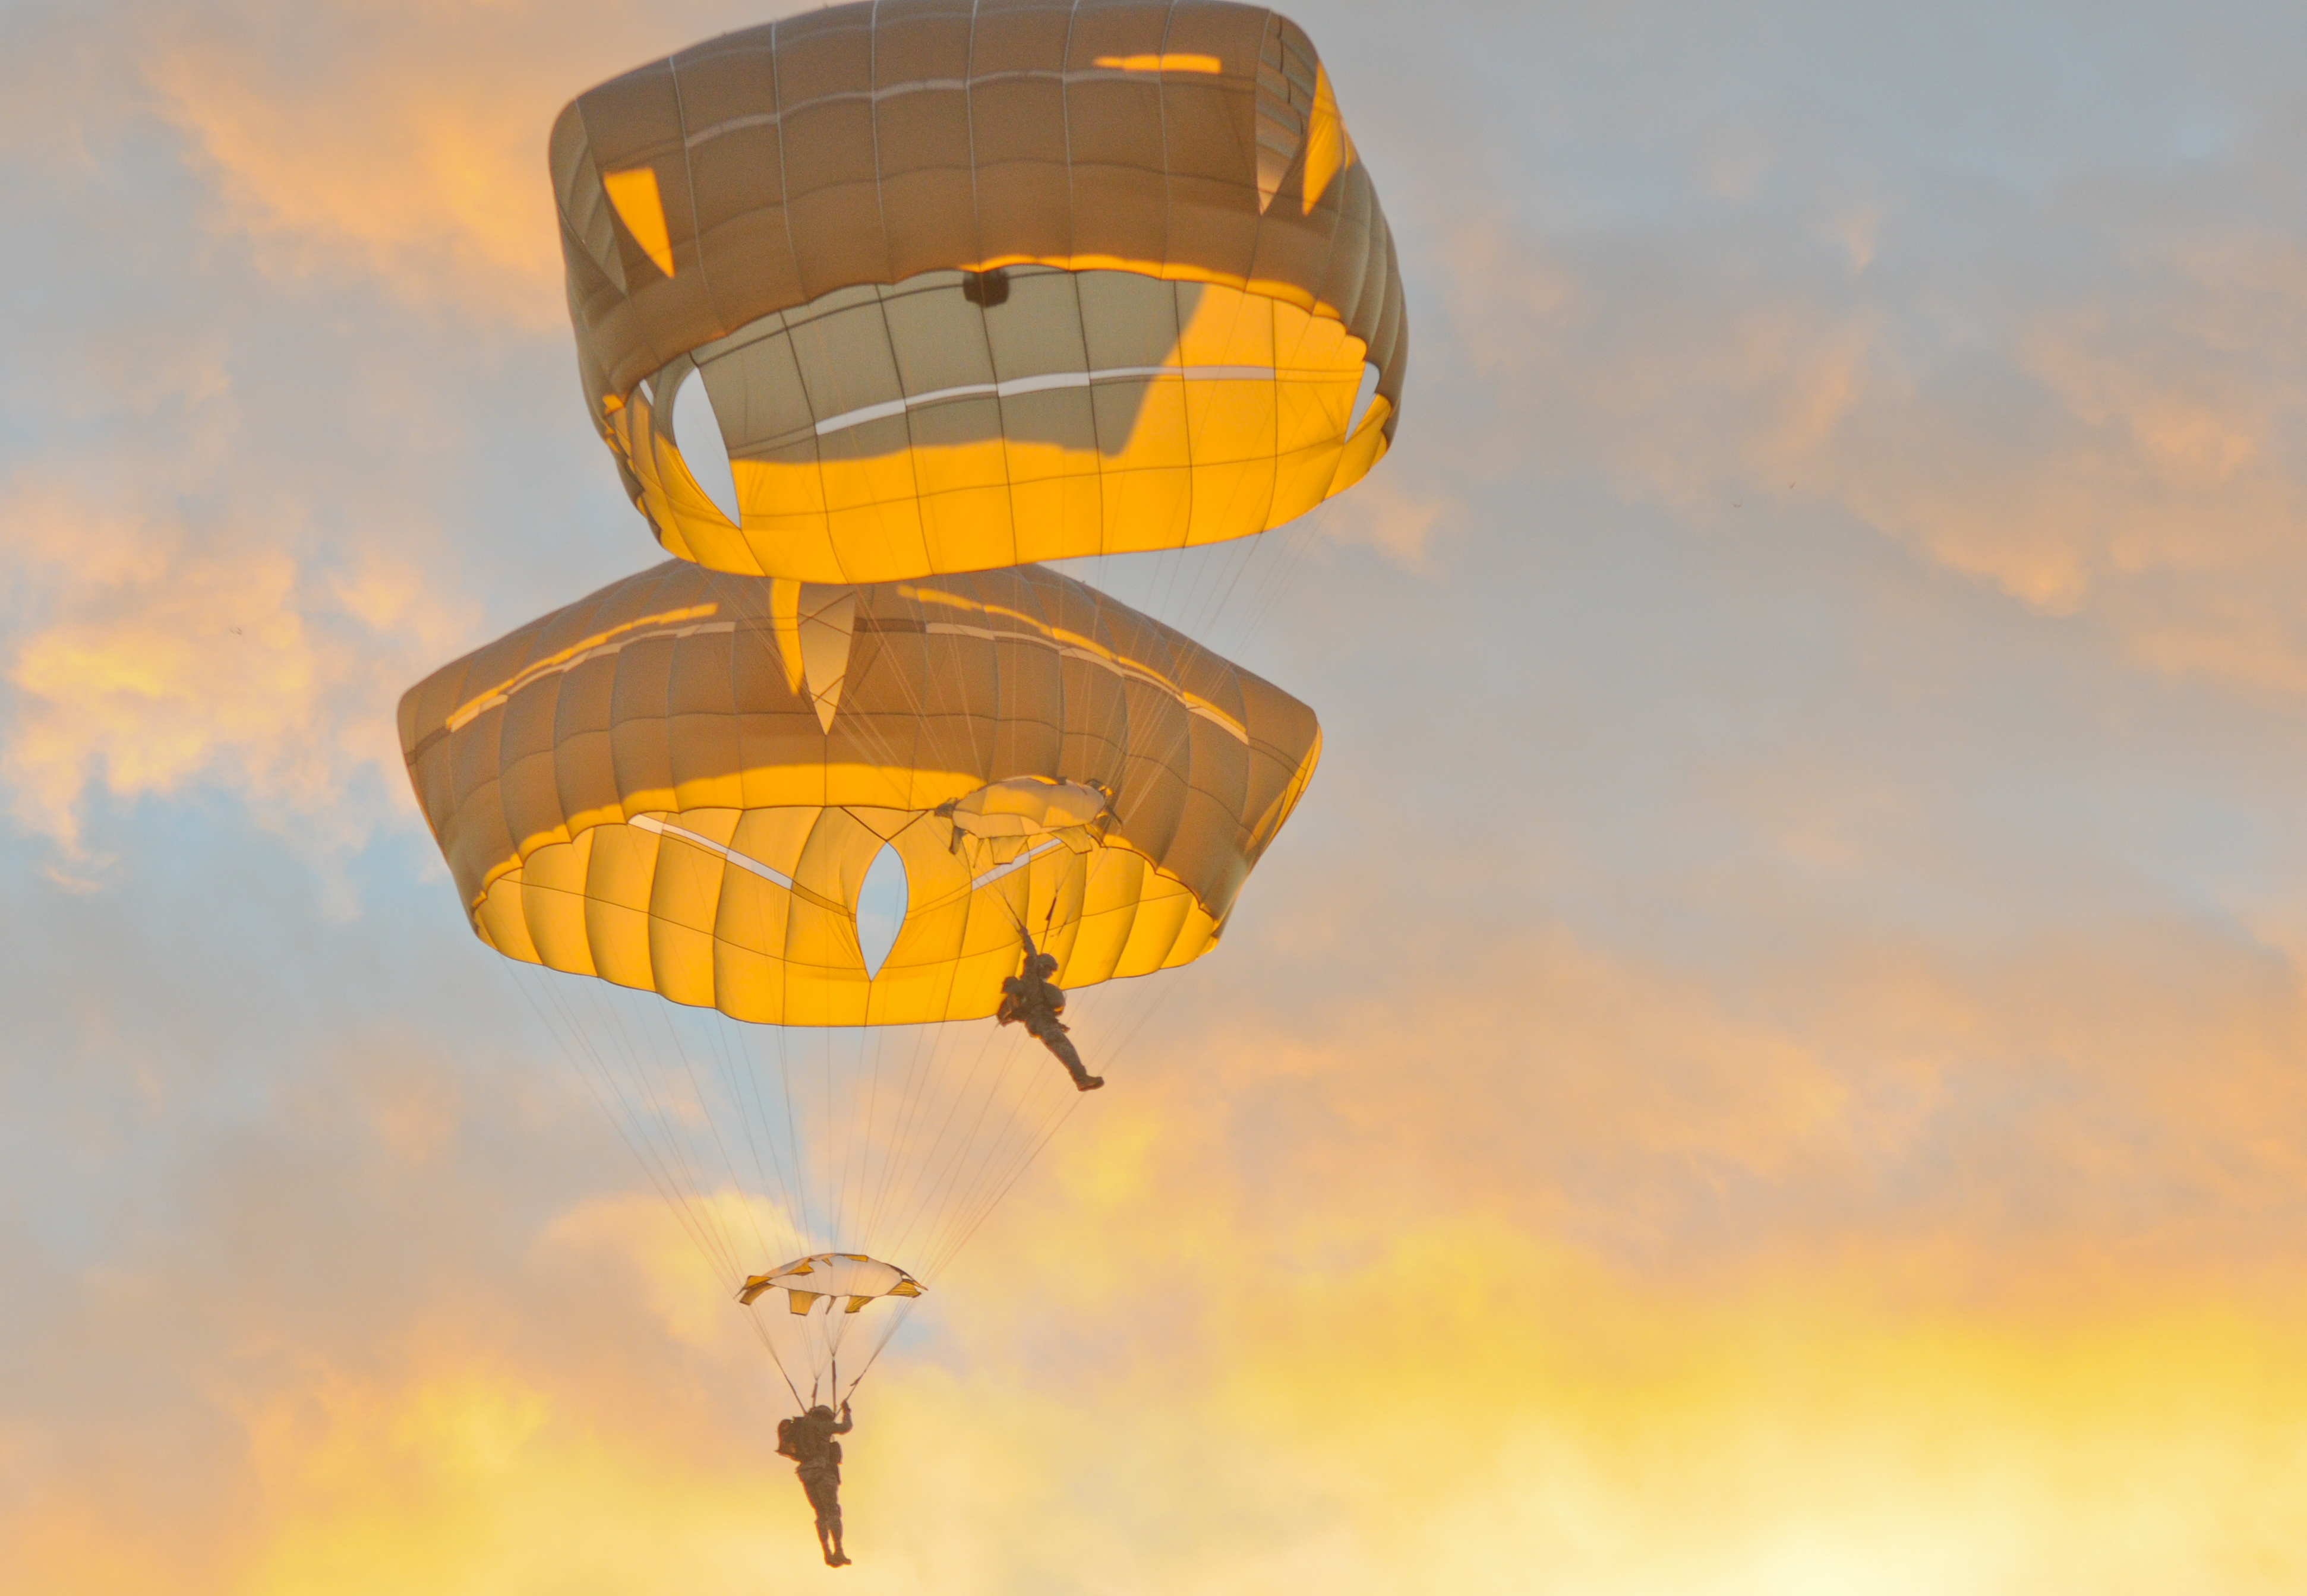 Spartan_Brigade_leaders_jump_with_Army%27s_T-11_parachute_%28Image_2_of_11%29_%289935557163%29.jpg